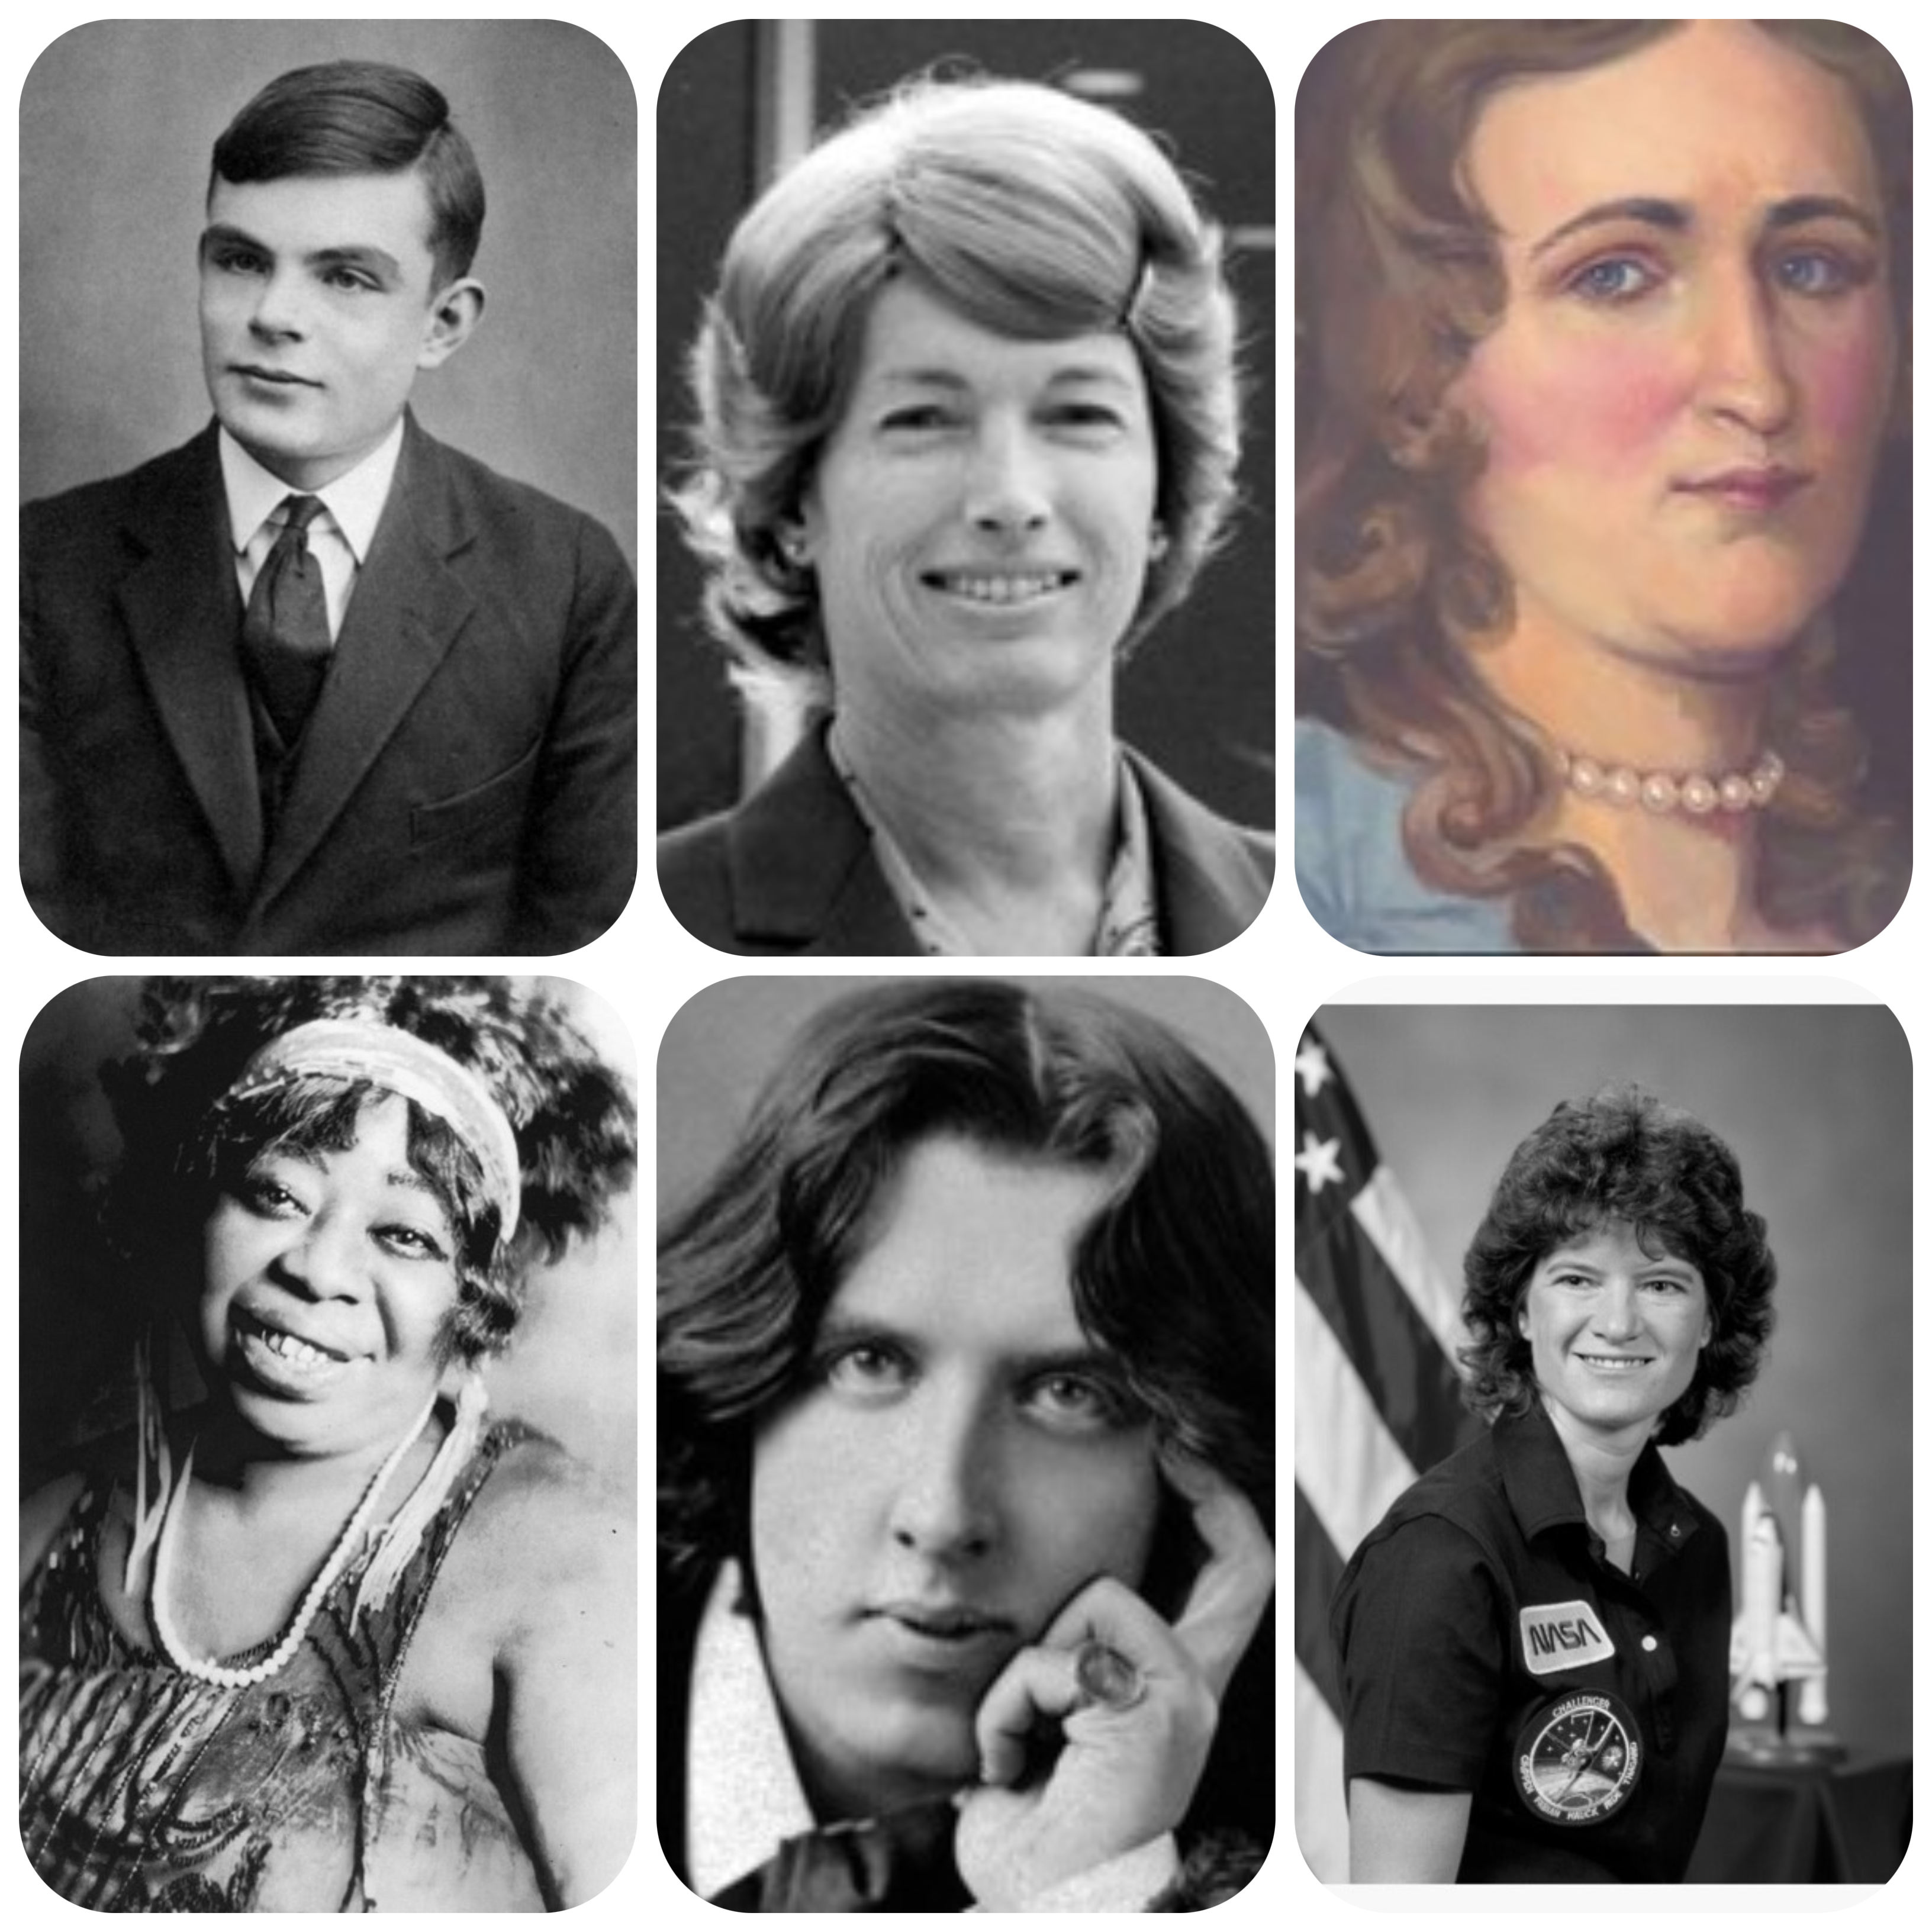 Montreal Careers - Queer History Month - 6 portraits of renowned LGBTQ+ faces